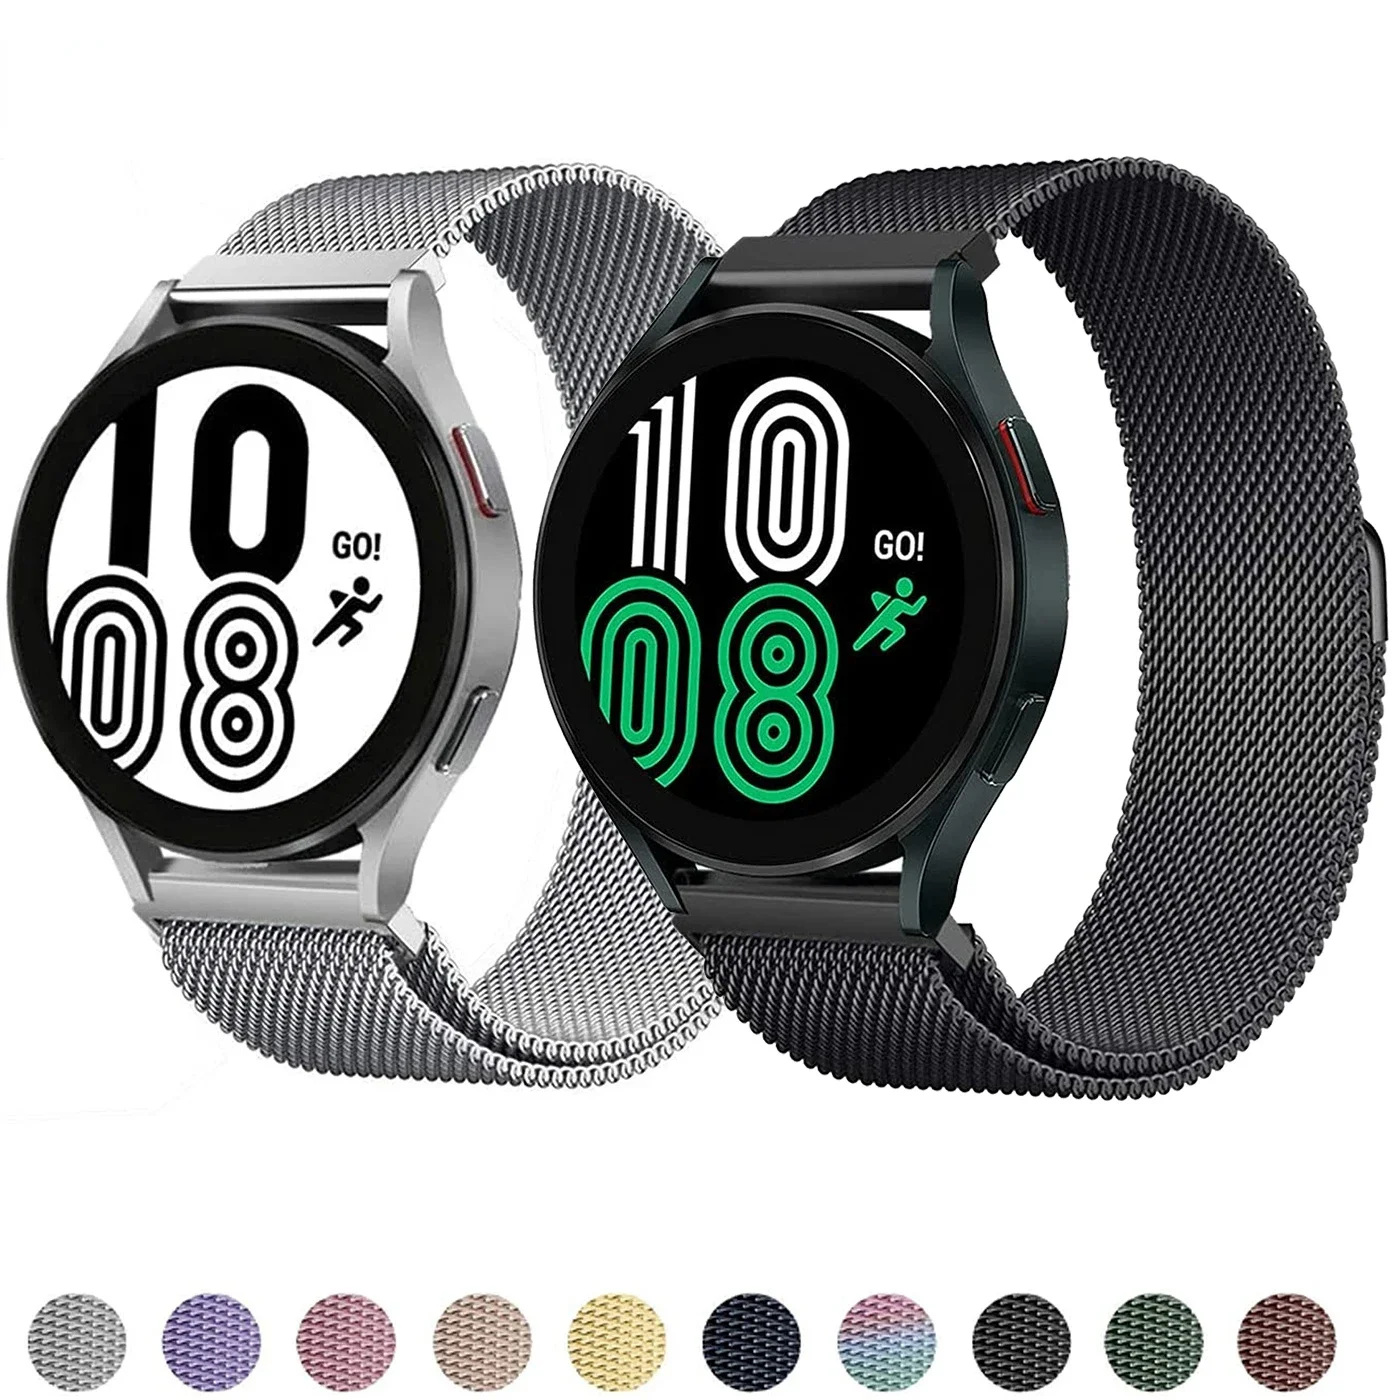 

Milanese Loop Strap For Samsung Galaxy watch 4 5 3 classic Active 2 45mm 41mm 46mm 42mm 20mm 22mm bracelet Huawei GT/3/2/2e band